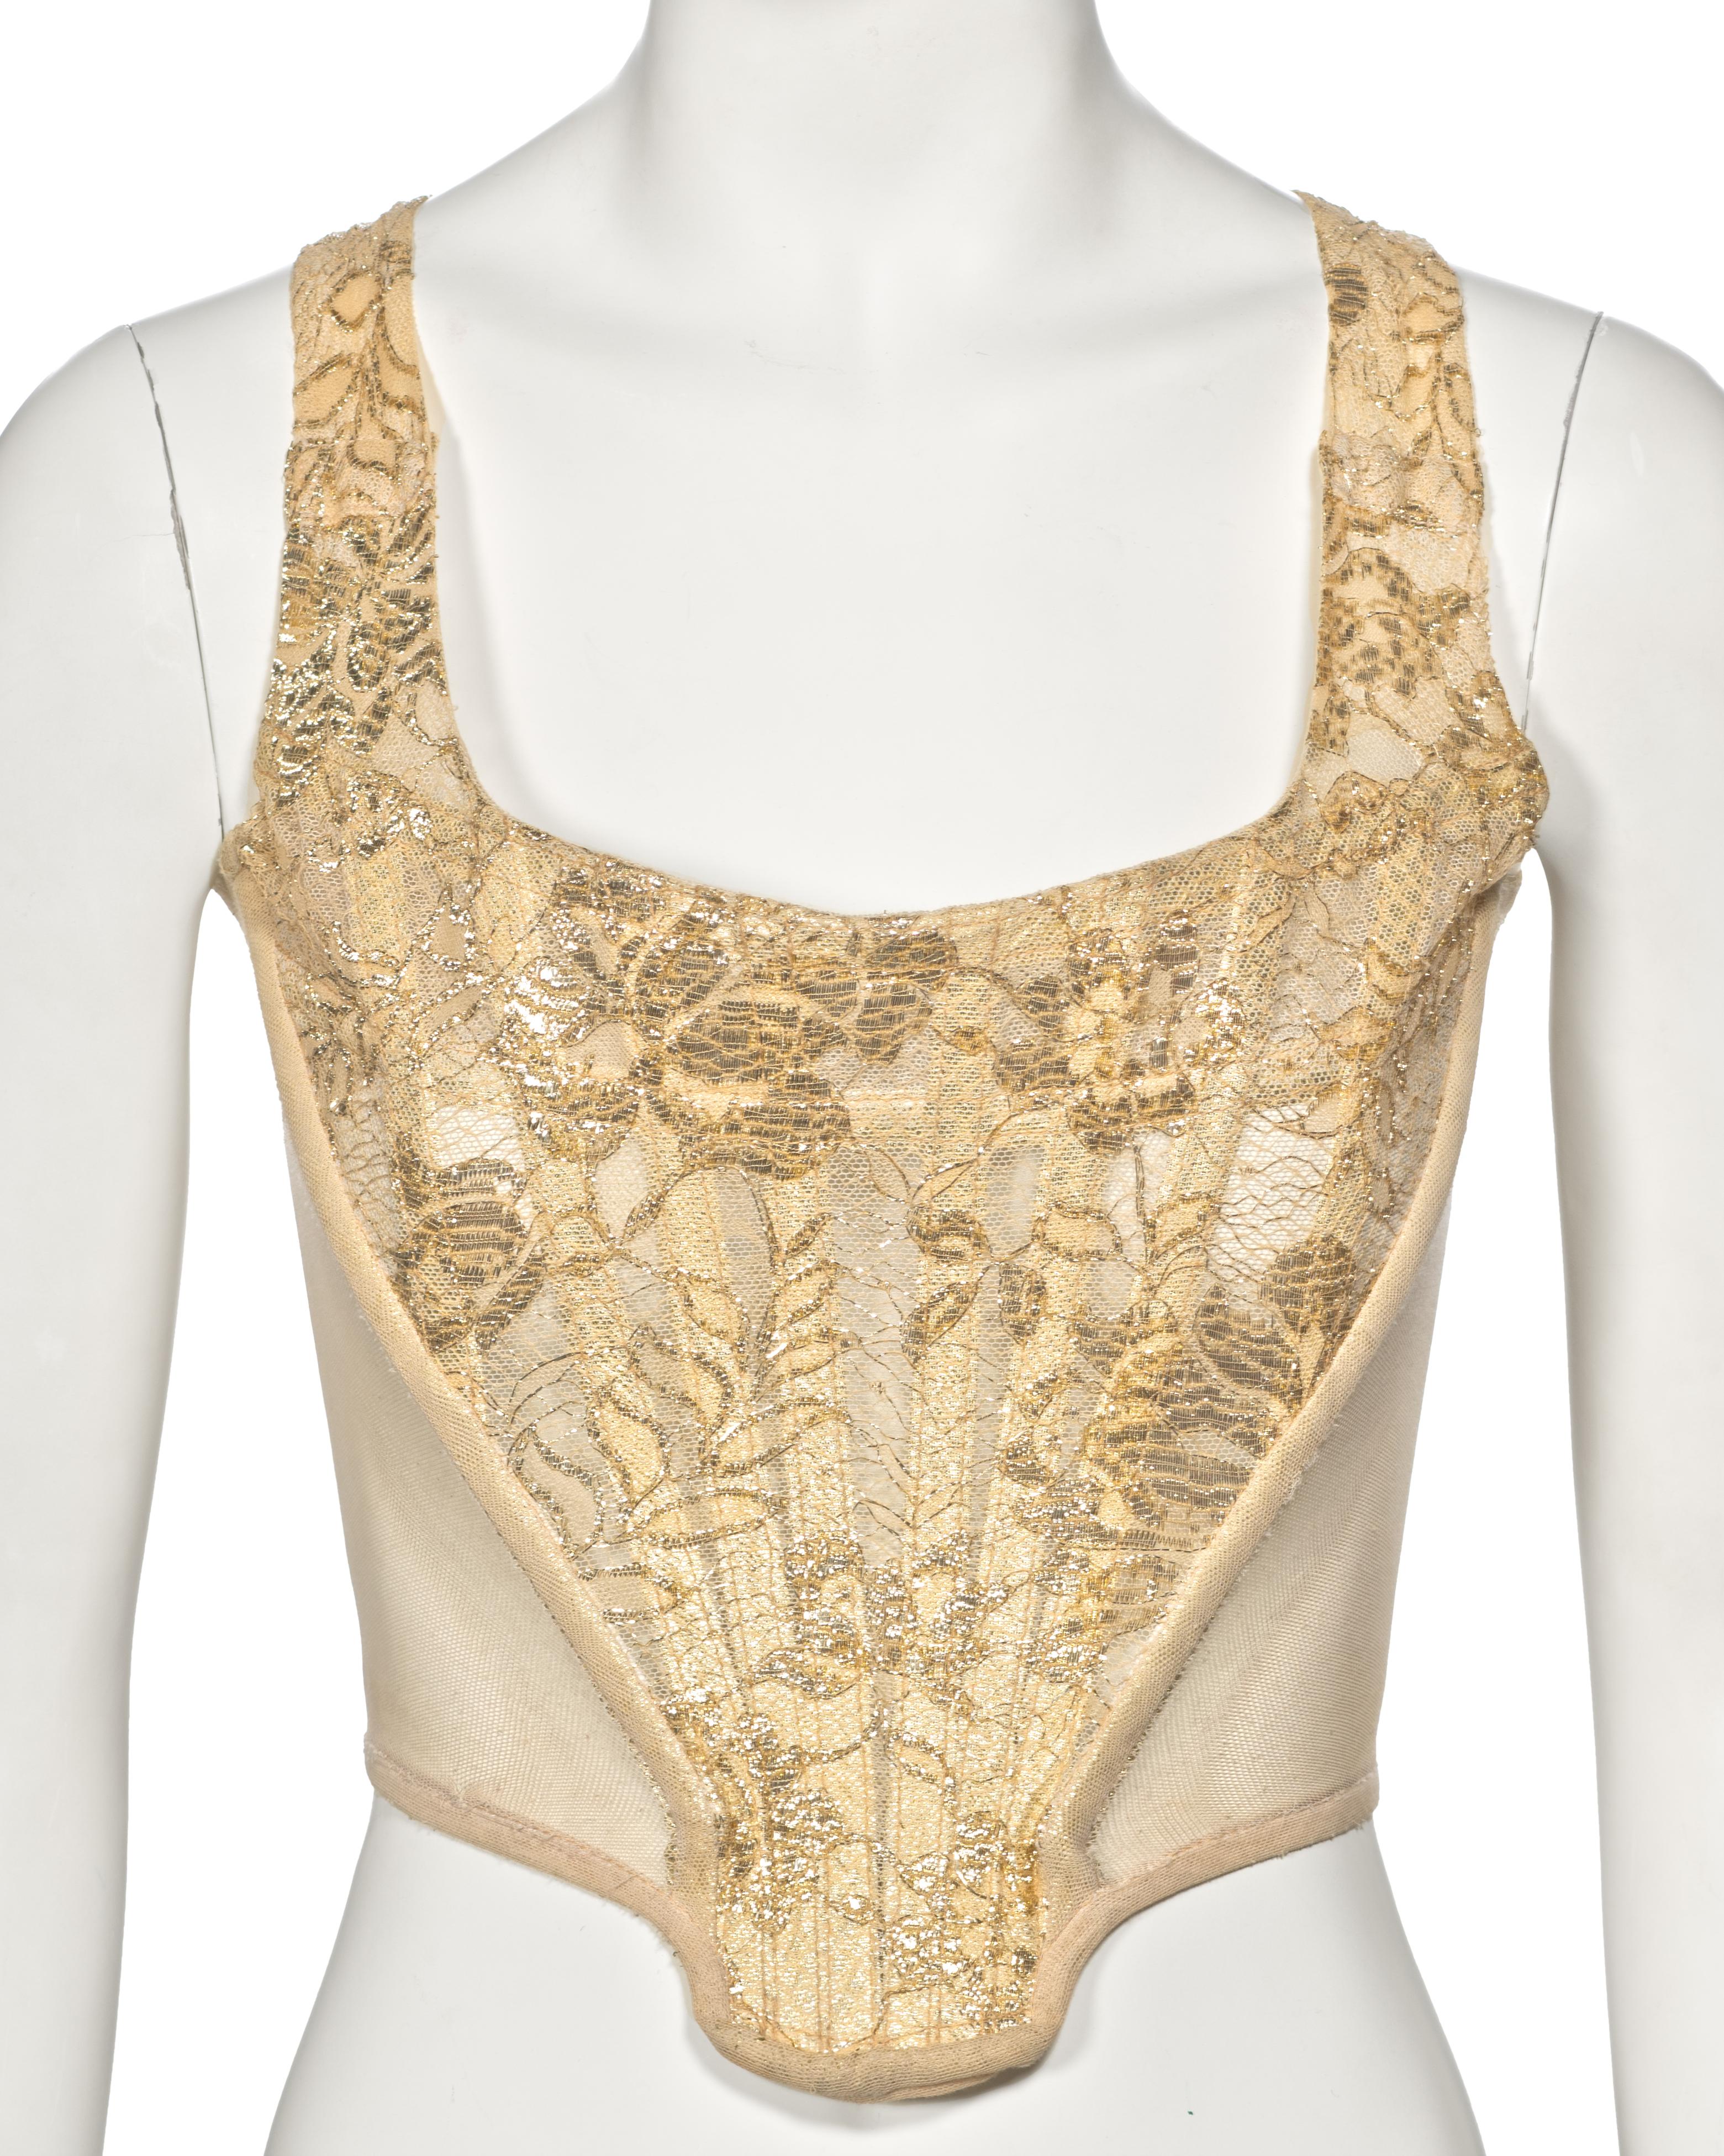 Vivienne Westwood Gold Metallic Lace Corset, fw 1993 In Good Condition For Sale In London, GB